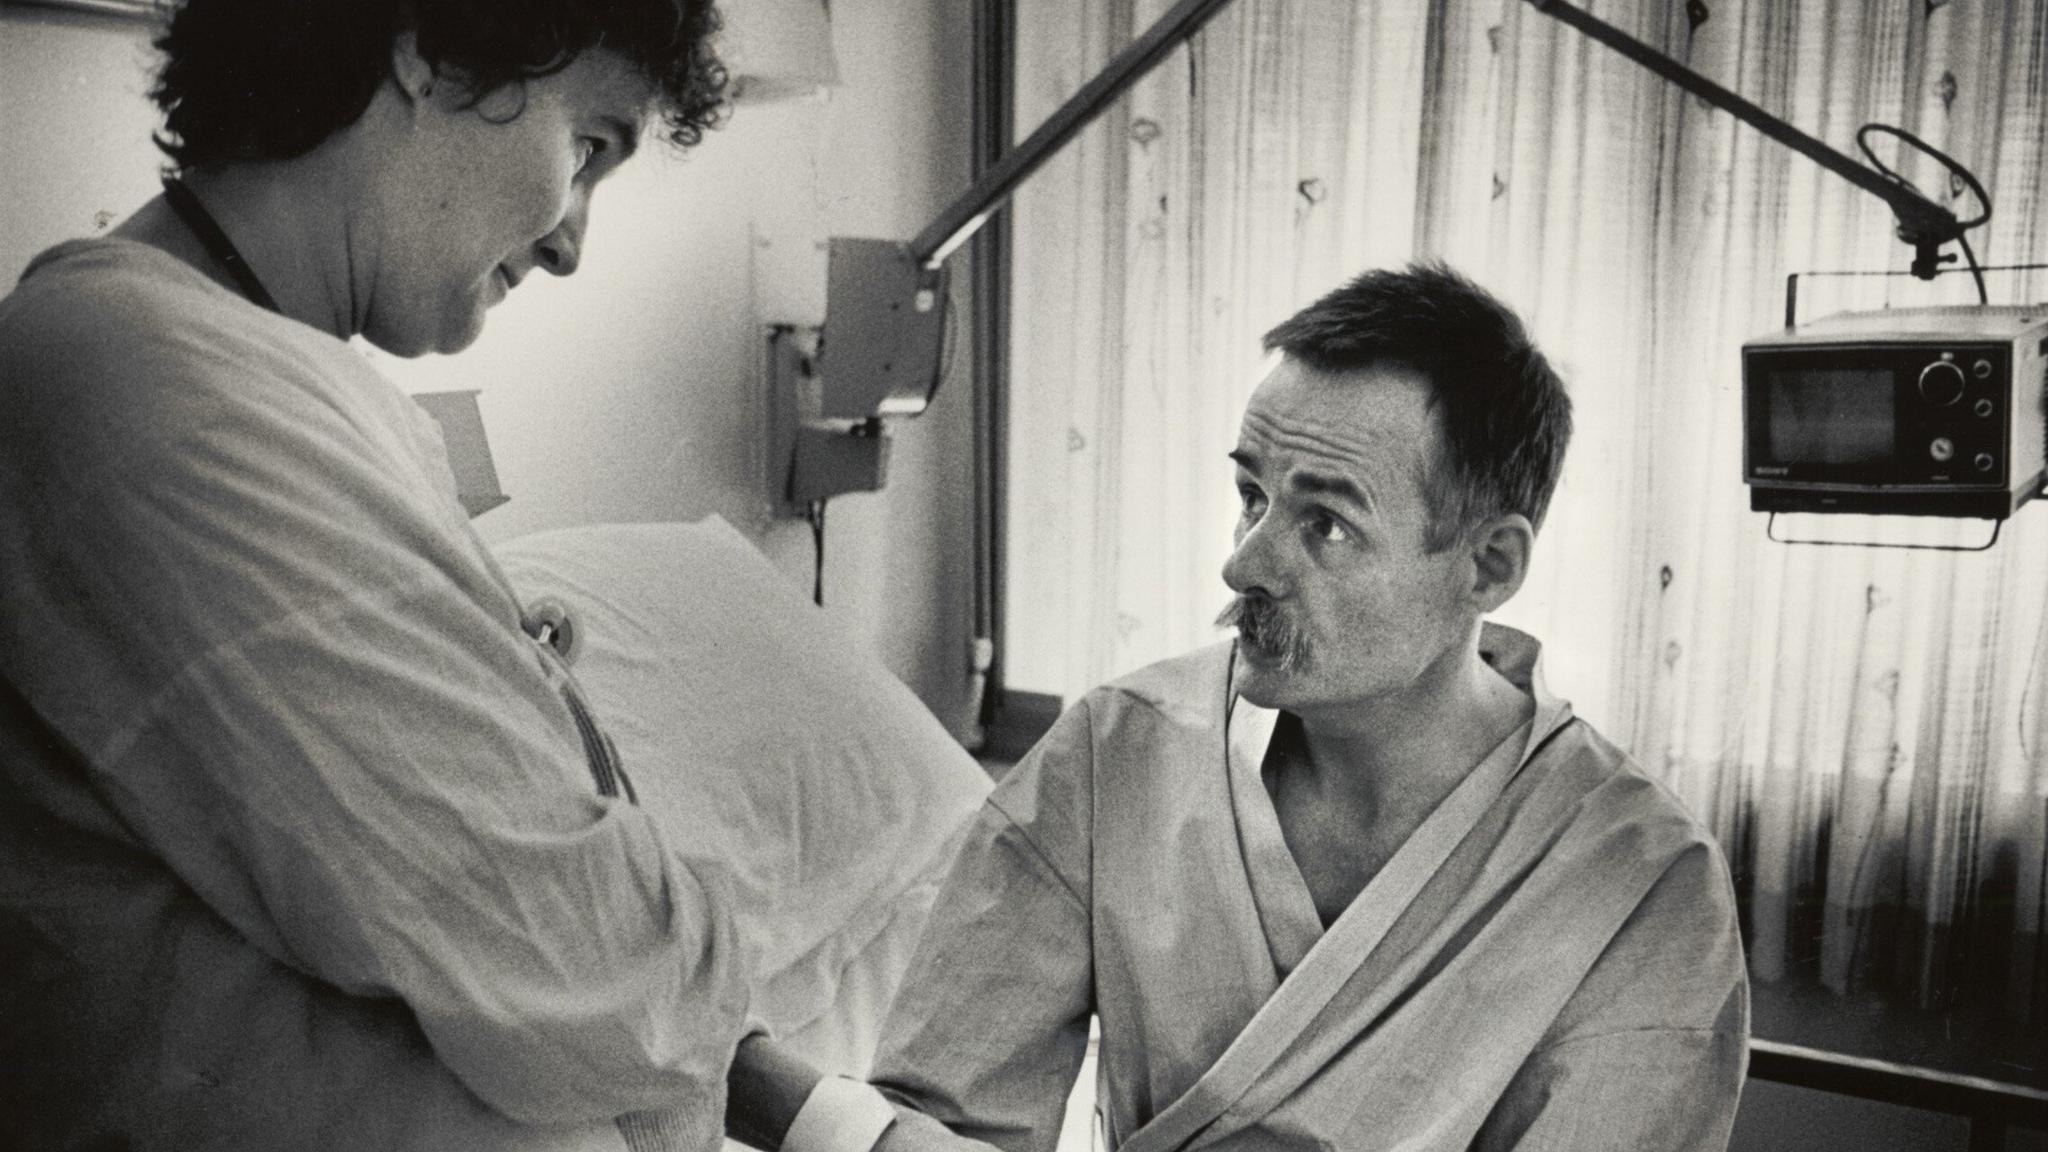 A black and white photo shows a man sat on a bed in a hospital ward. He has a moustache and is wearing a dressing gown as he looks up at a female nurse who is taking his pulse. Behind him the thin curtain is drawn and a small 1980s TV monitor is mounted on a metal arm attached to the wall.